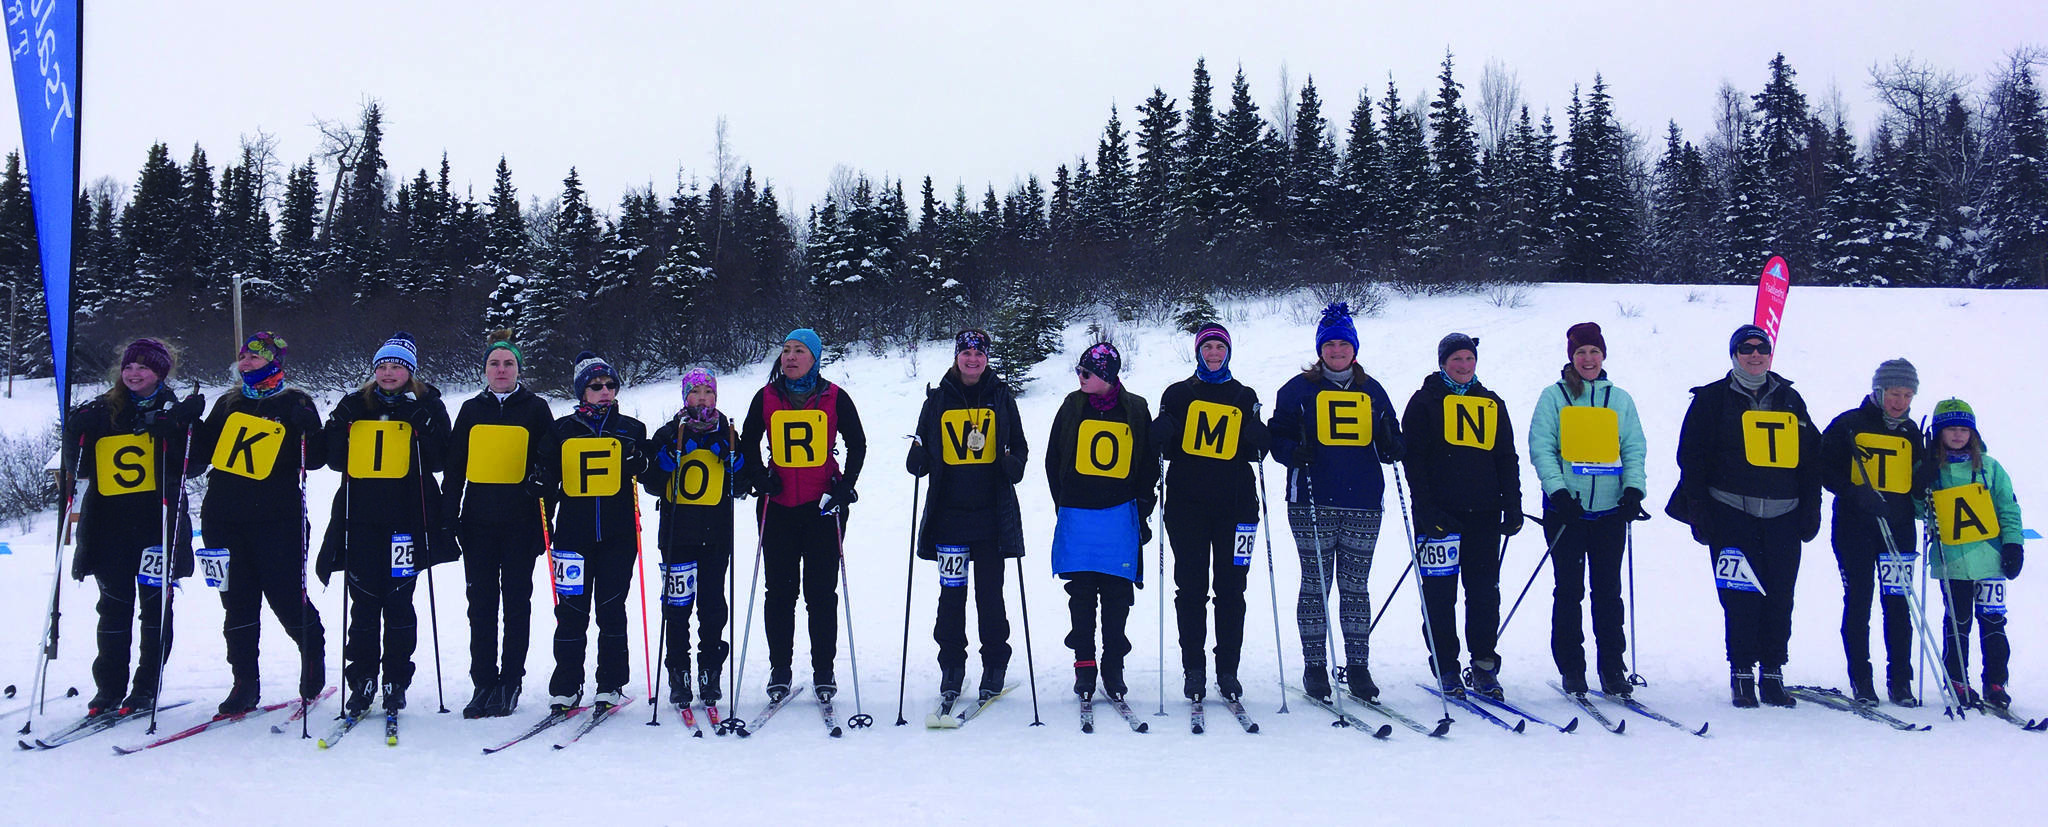 Ski for Women participants show off their group costume inspired by the app Words With Friends on Sunday, Feb. 2, 2020, at Tsalteshi Trails near Soldotna, Alaska. (Photo by Jeff Helminiak/Peninsula Clarion)